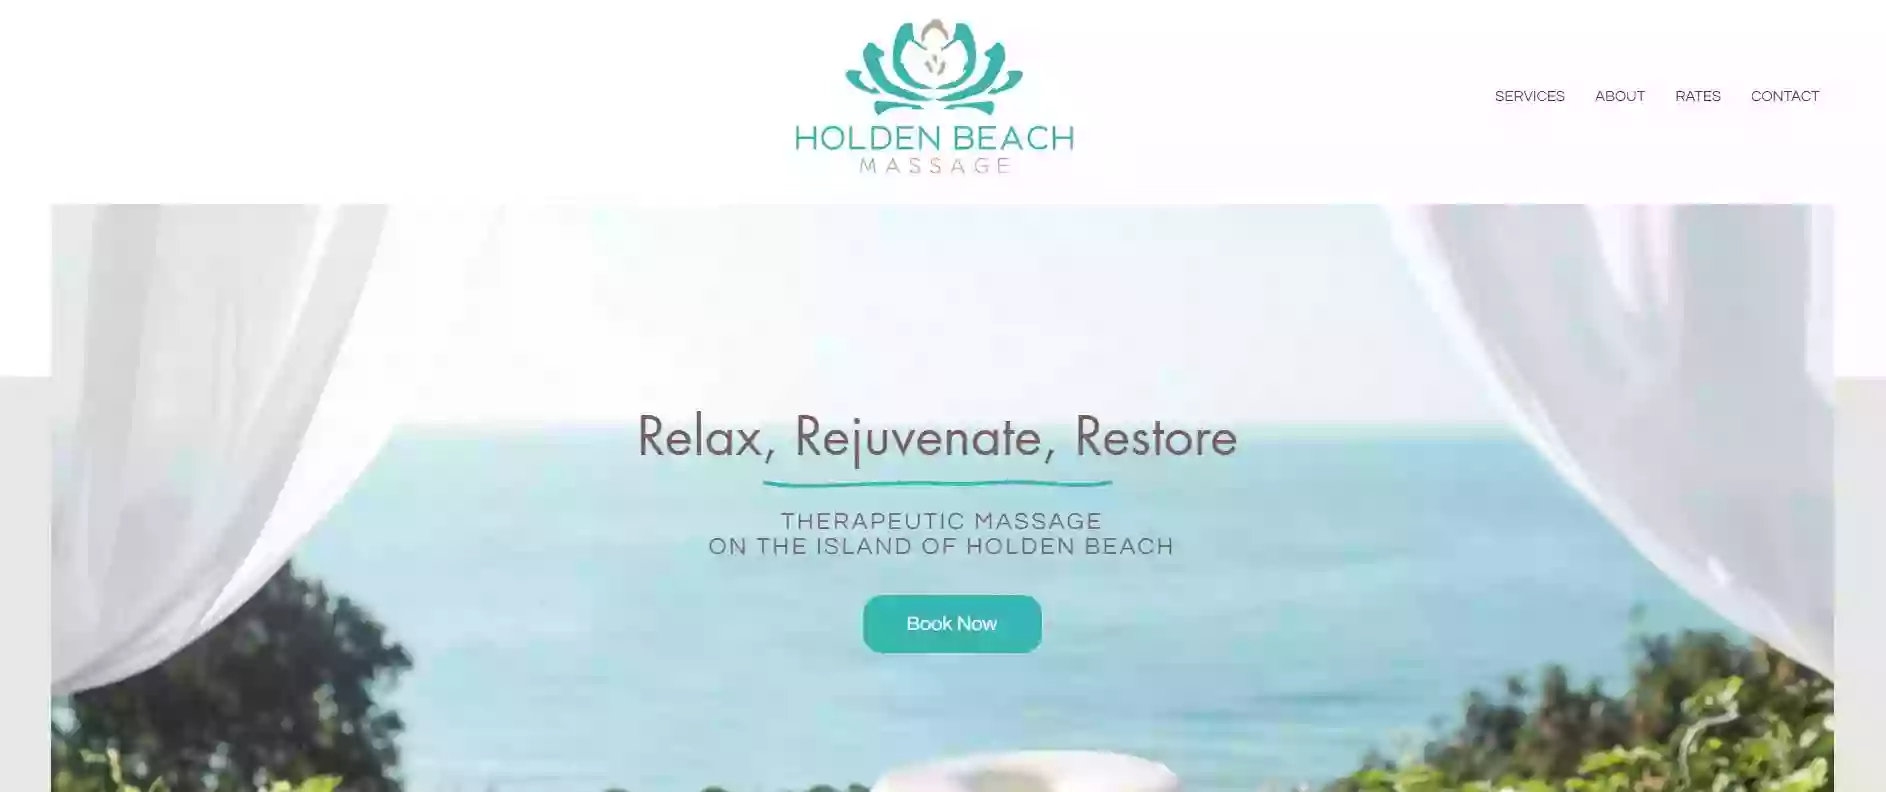 Massage Therapy at Holden Beach